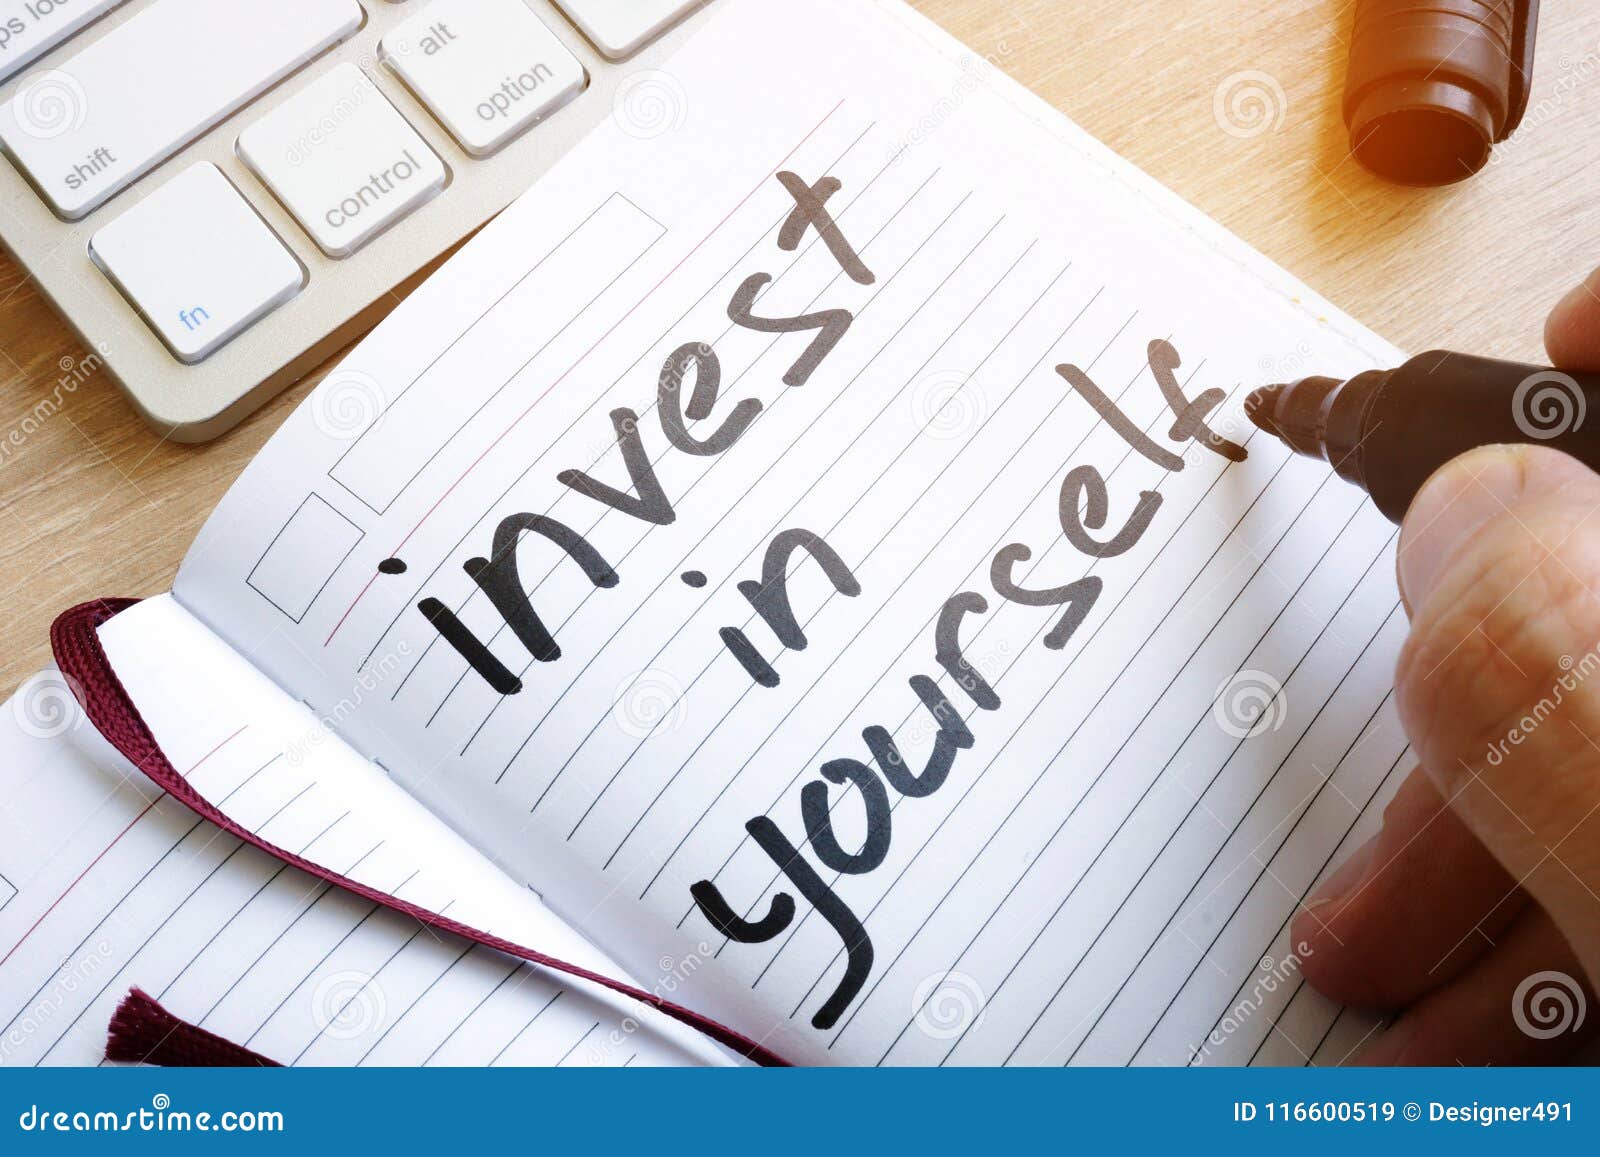 man is writing invest in yourself.